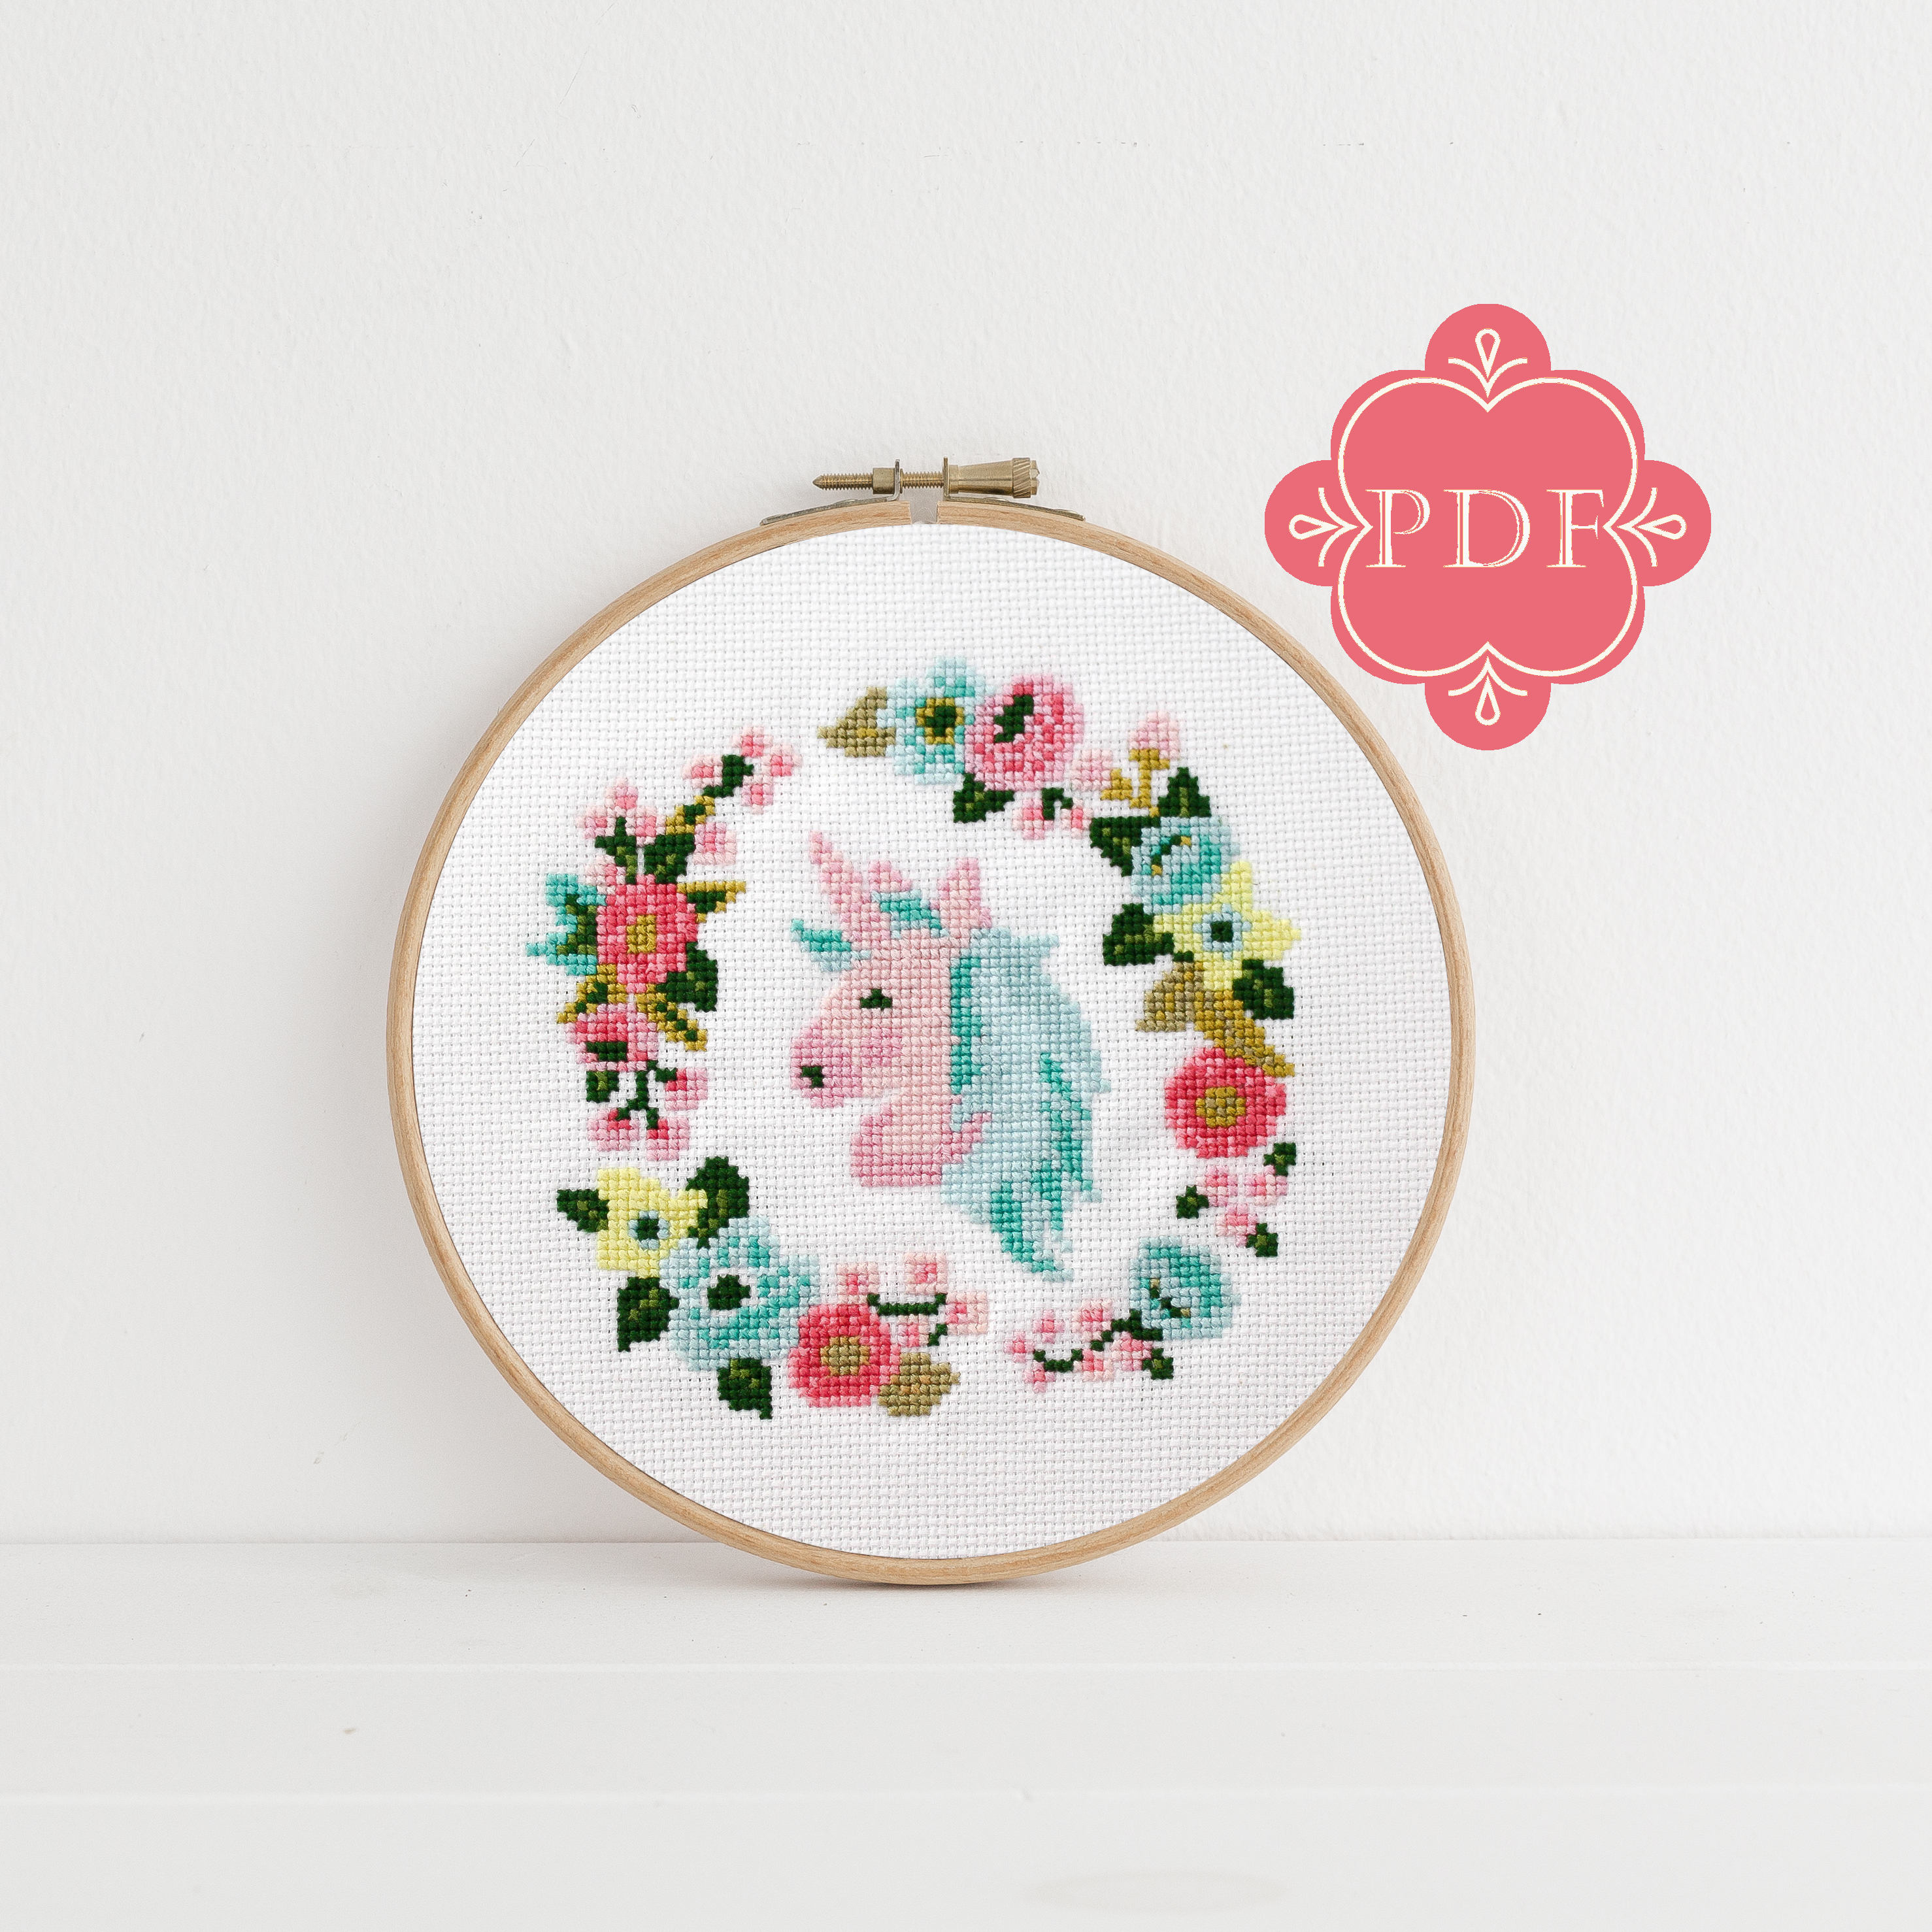 Diy Embroidery Patterns Pdf Counted Cross Stitch Unicorn Cross Stitch Diy Embroidery